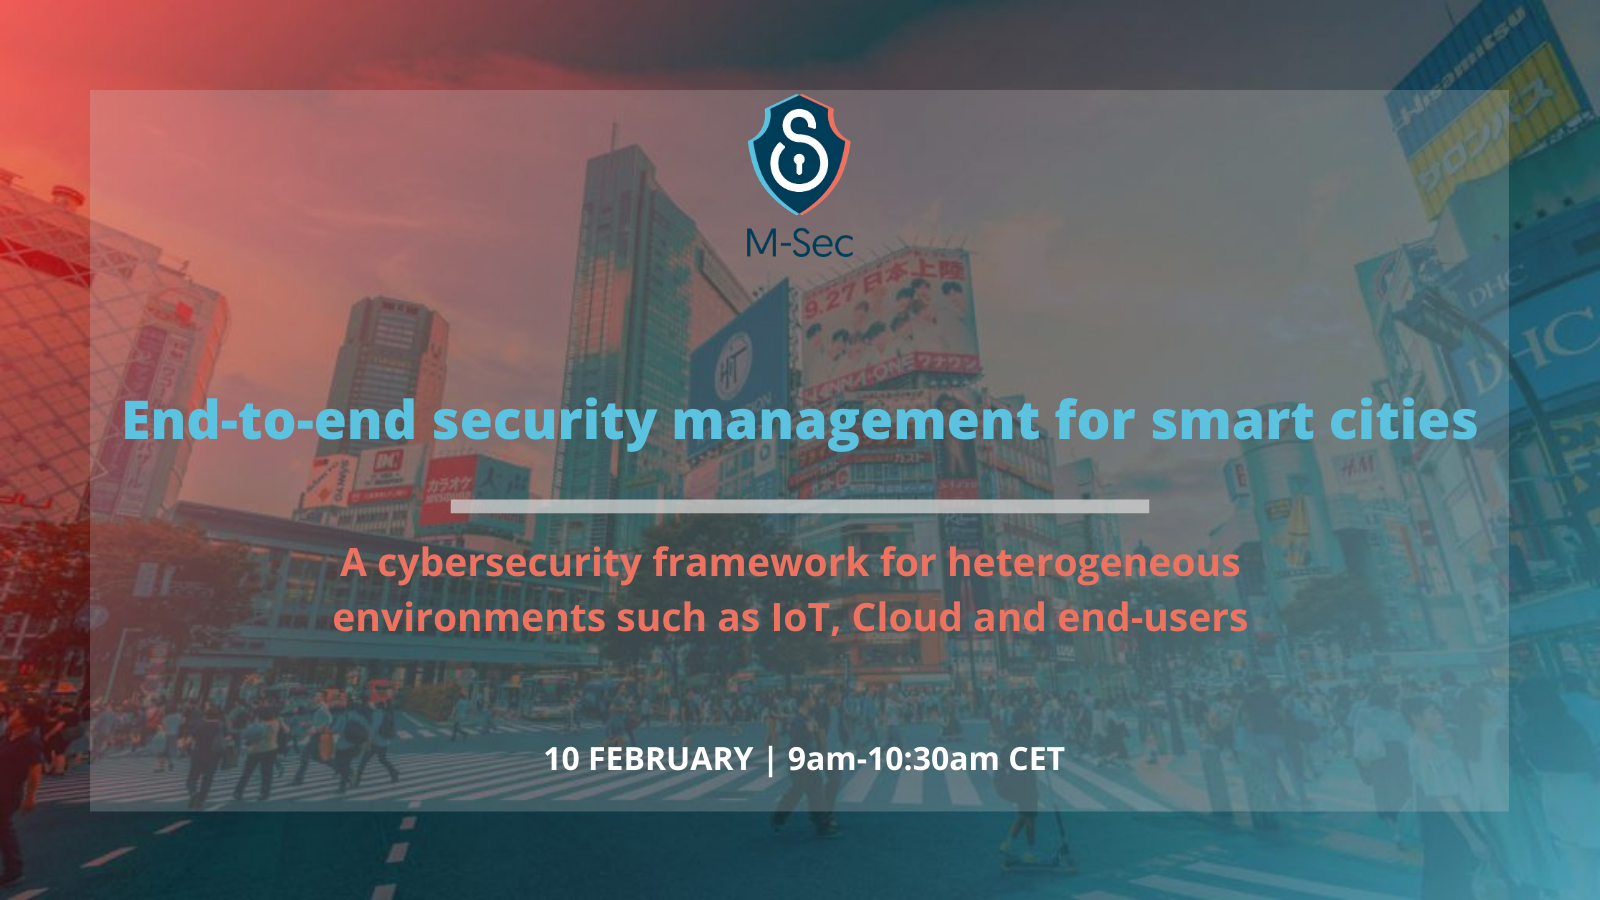 End-to-end security management for smart cities. Want to know more?